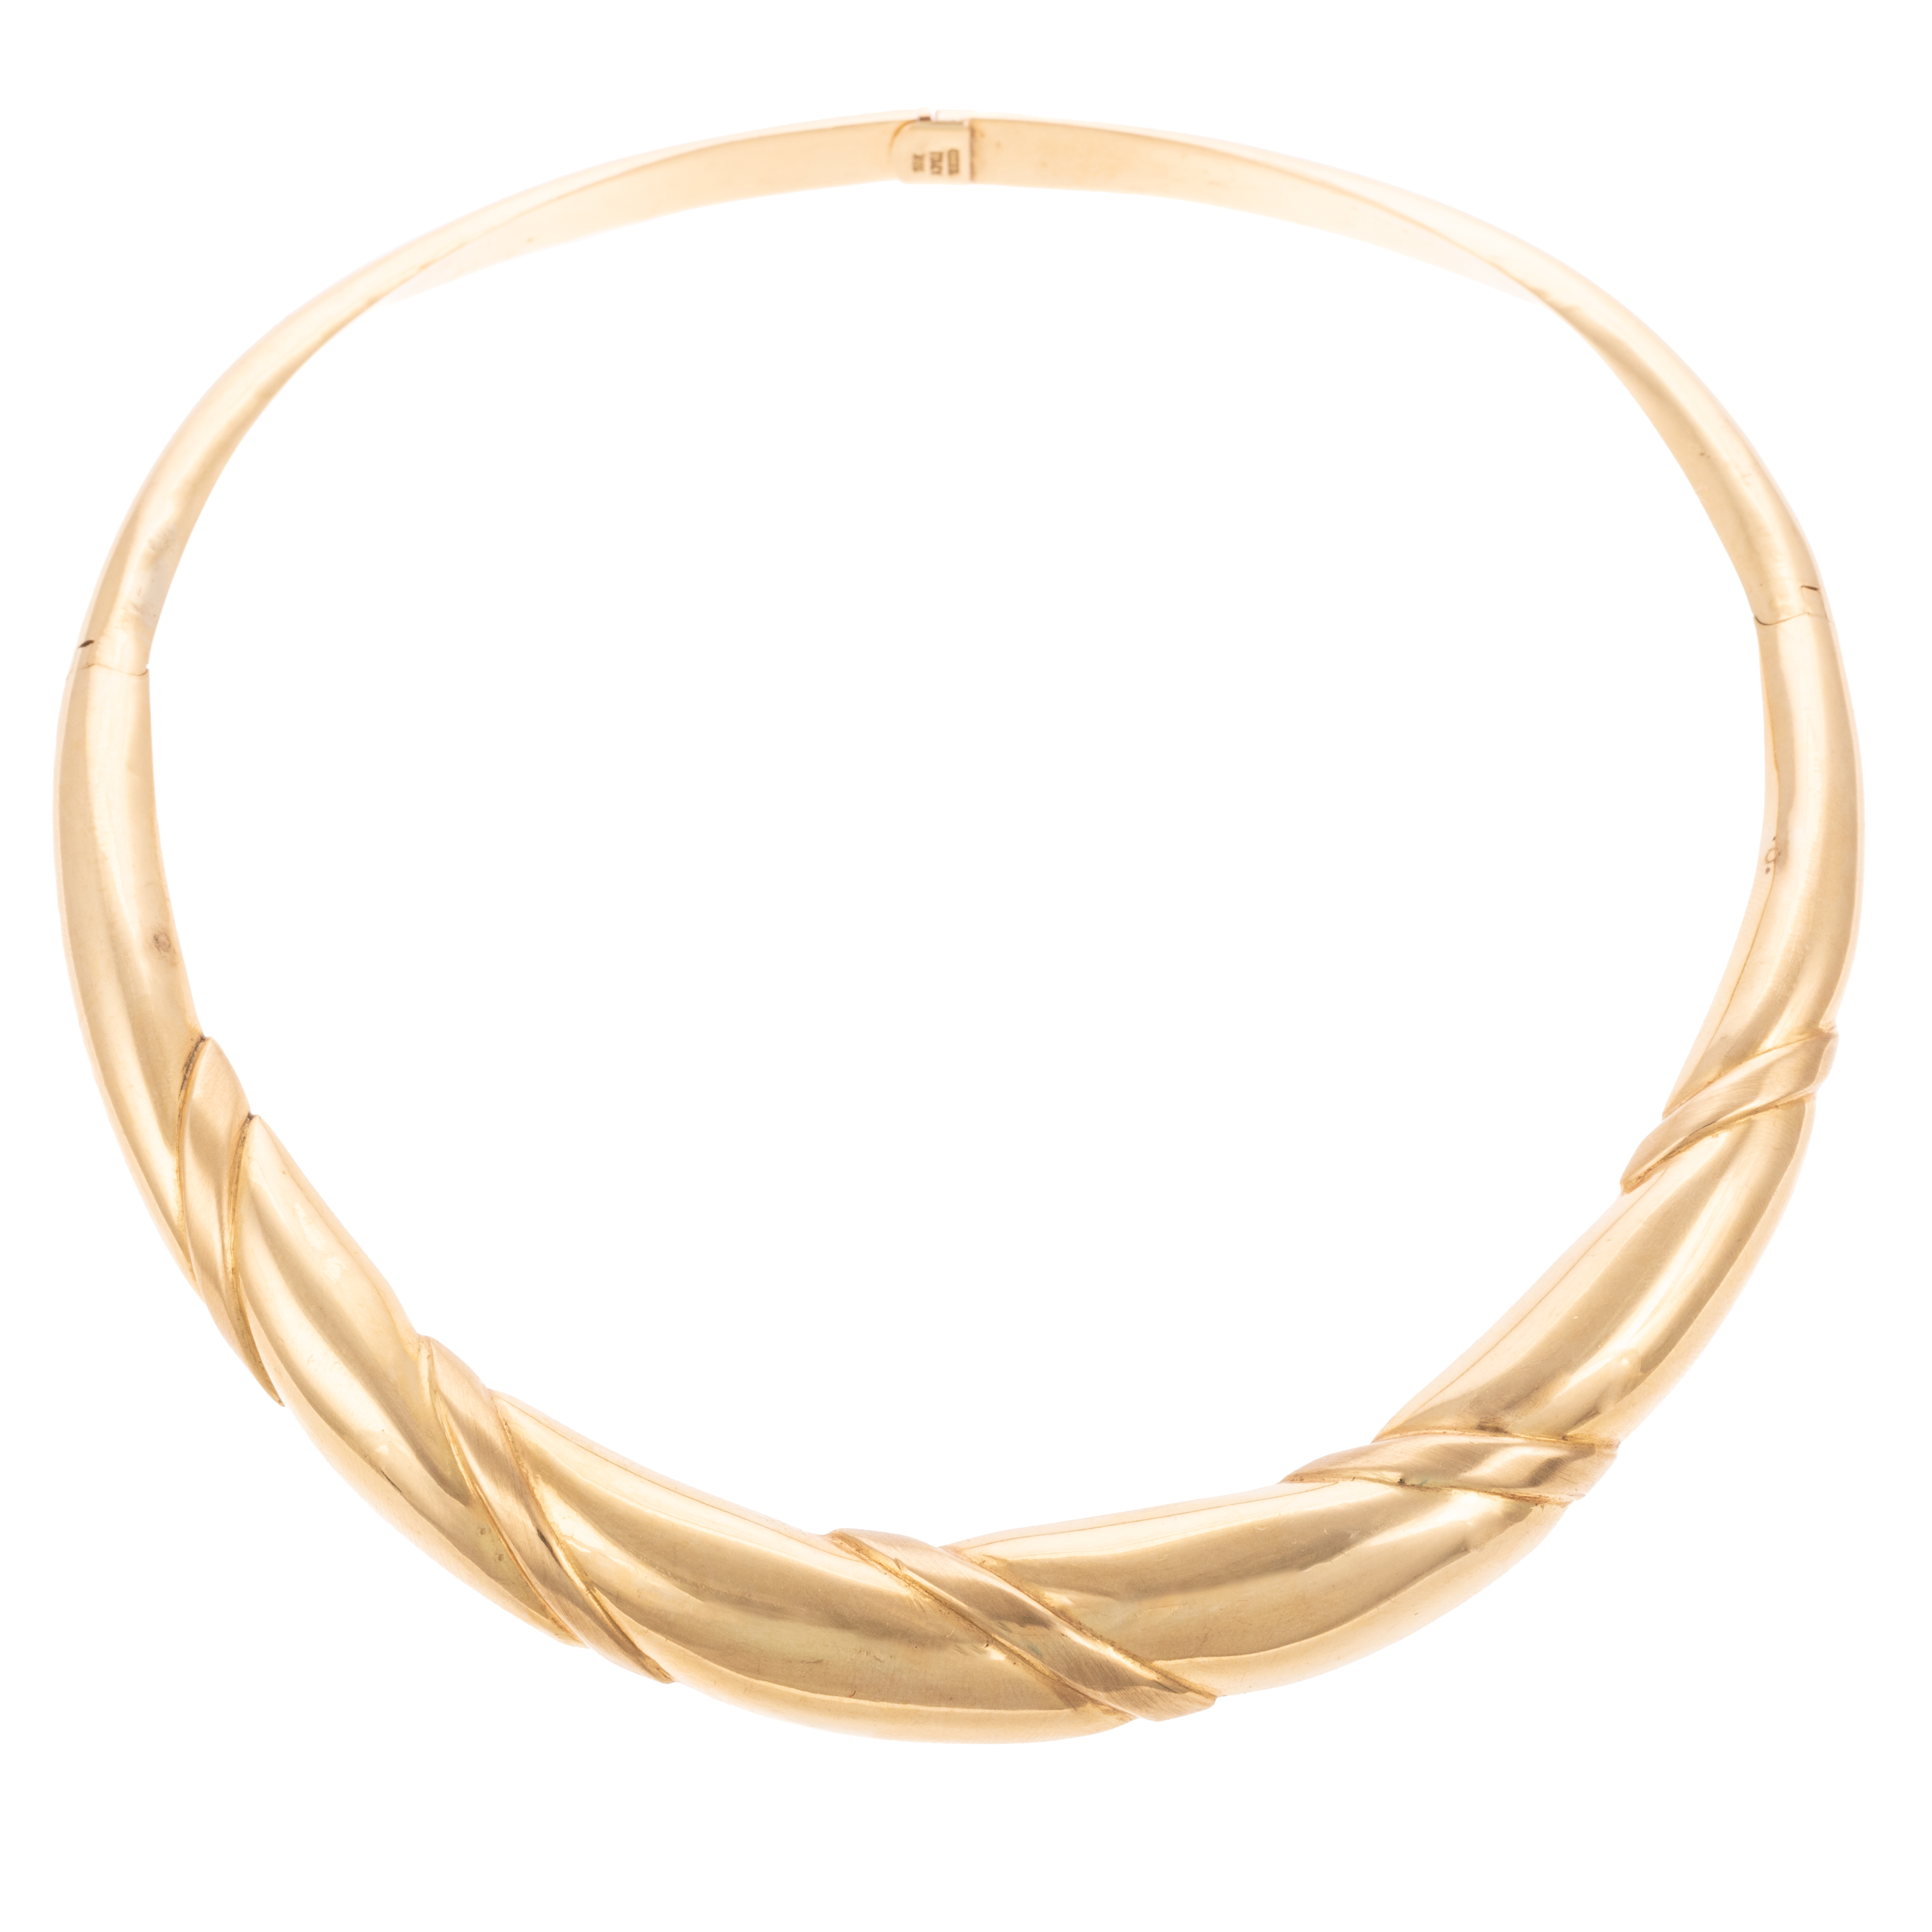 A HINGED COLLAR BY CITRA IN 18K 2ead81